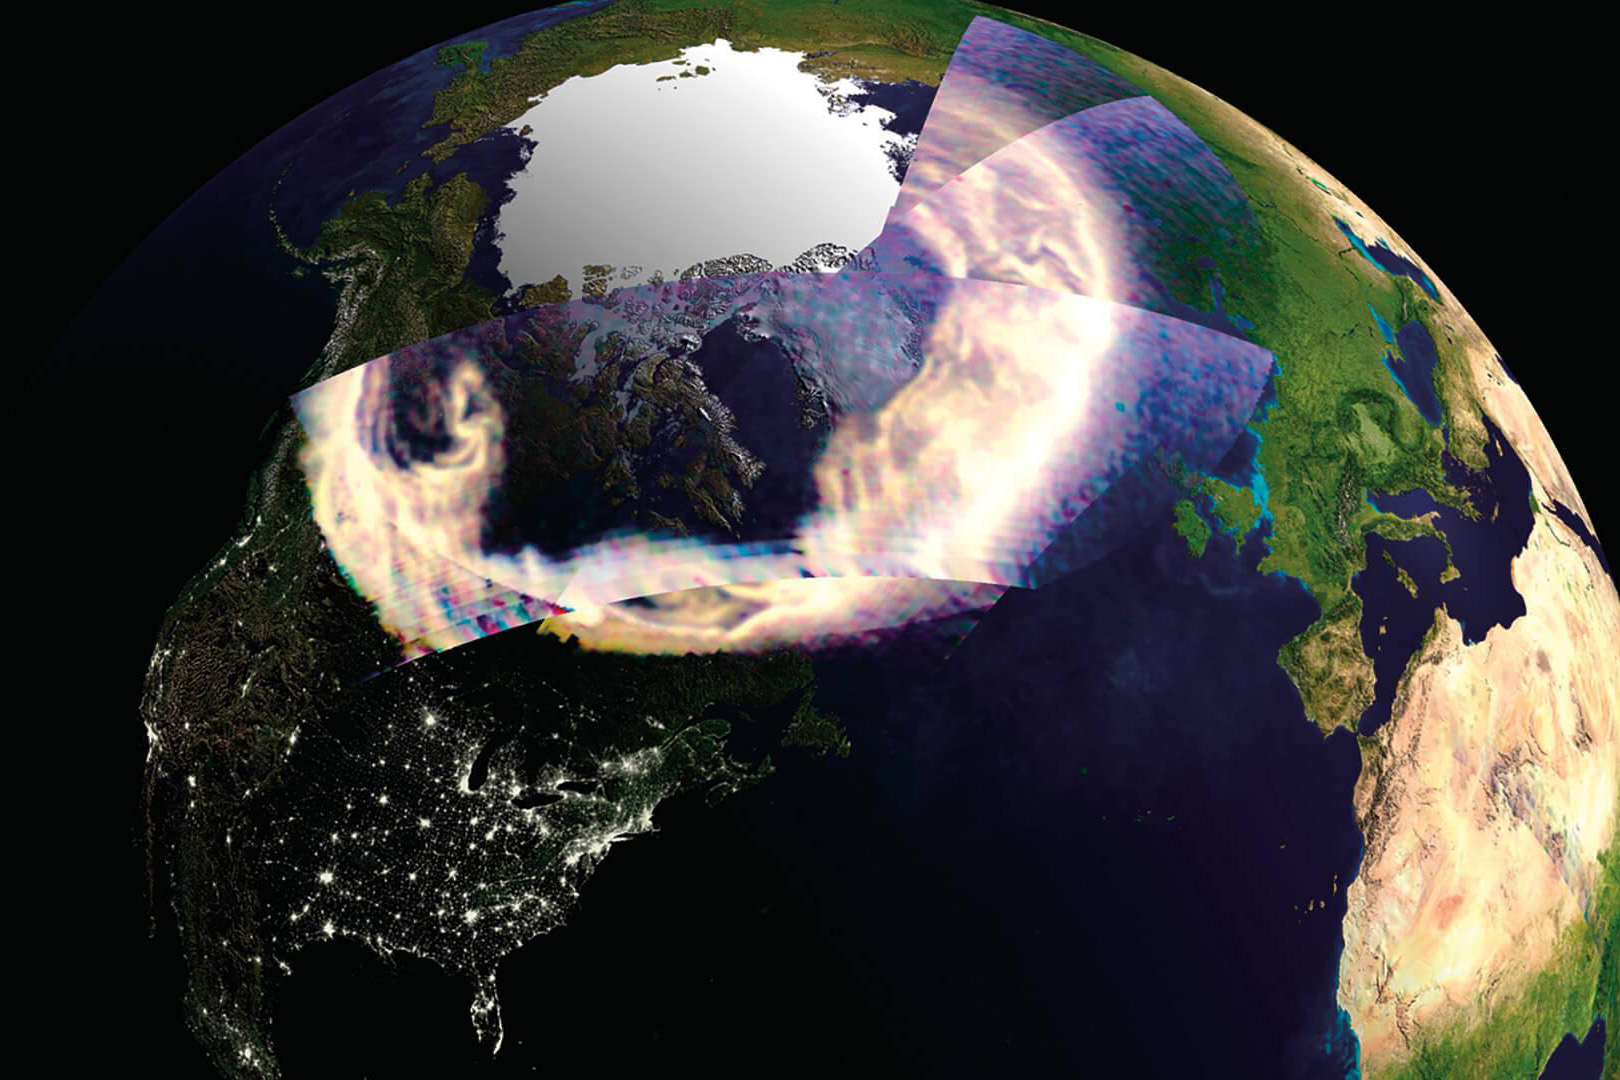 Visualization of earth's atmosphere through the GUVI